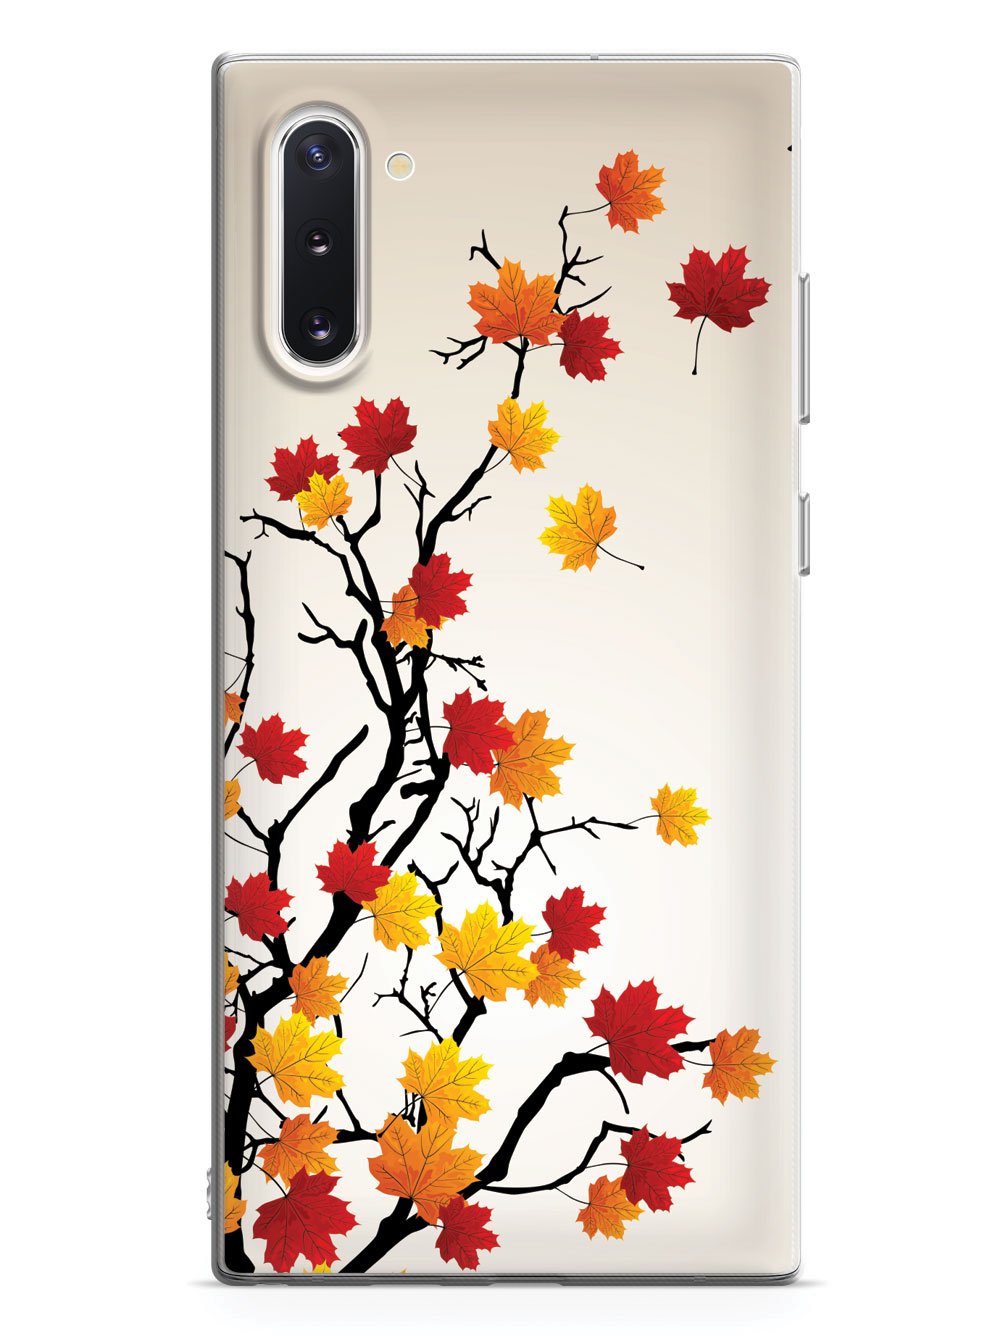 Autumn Leaves on Branches Case